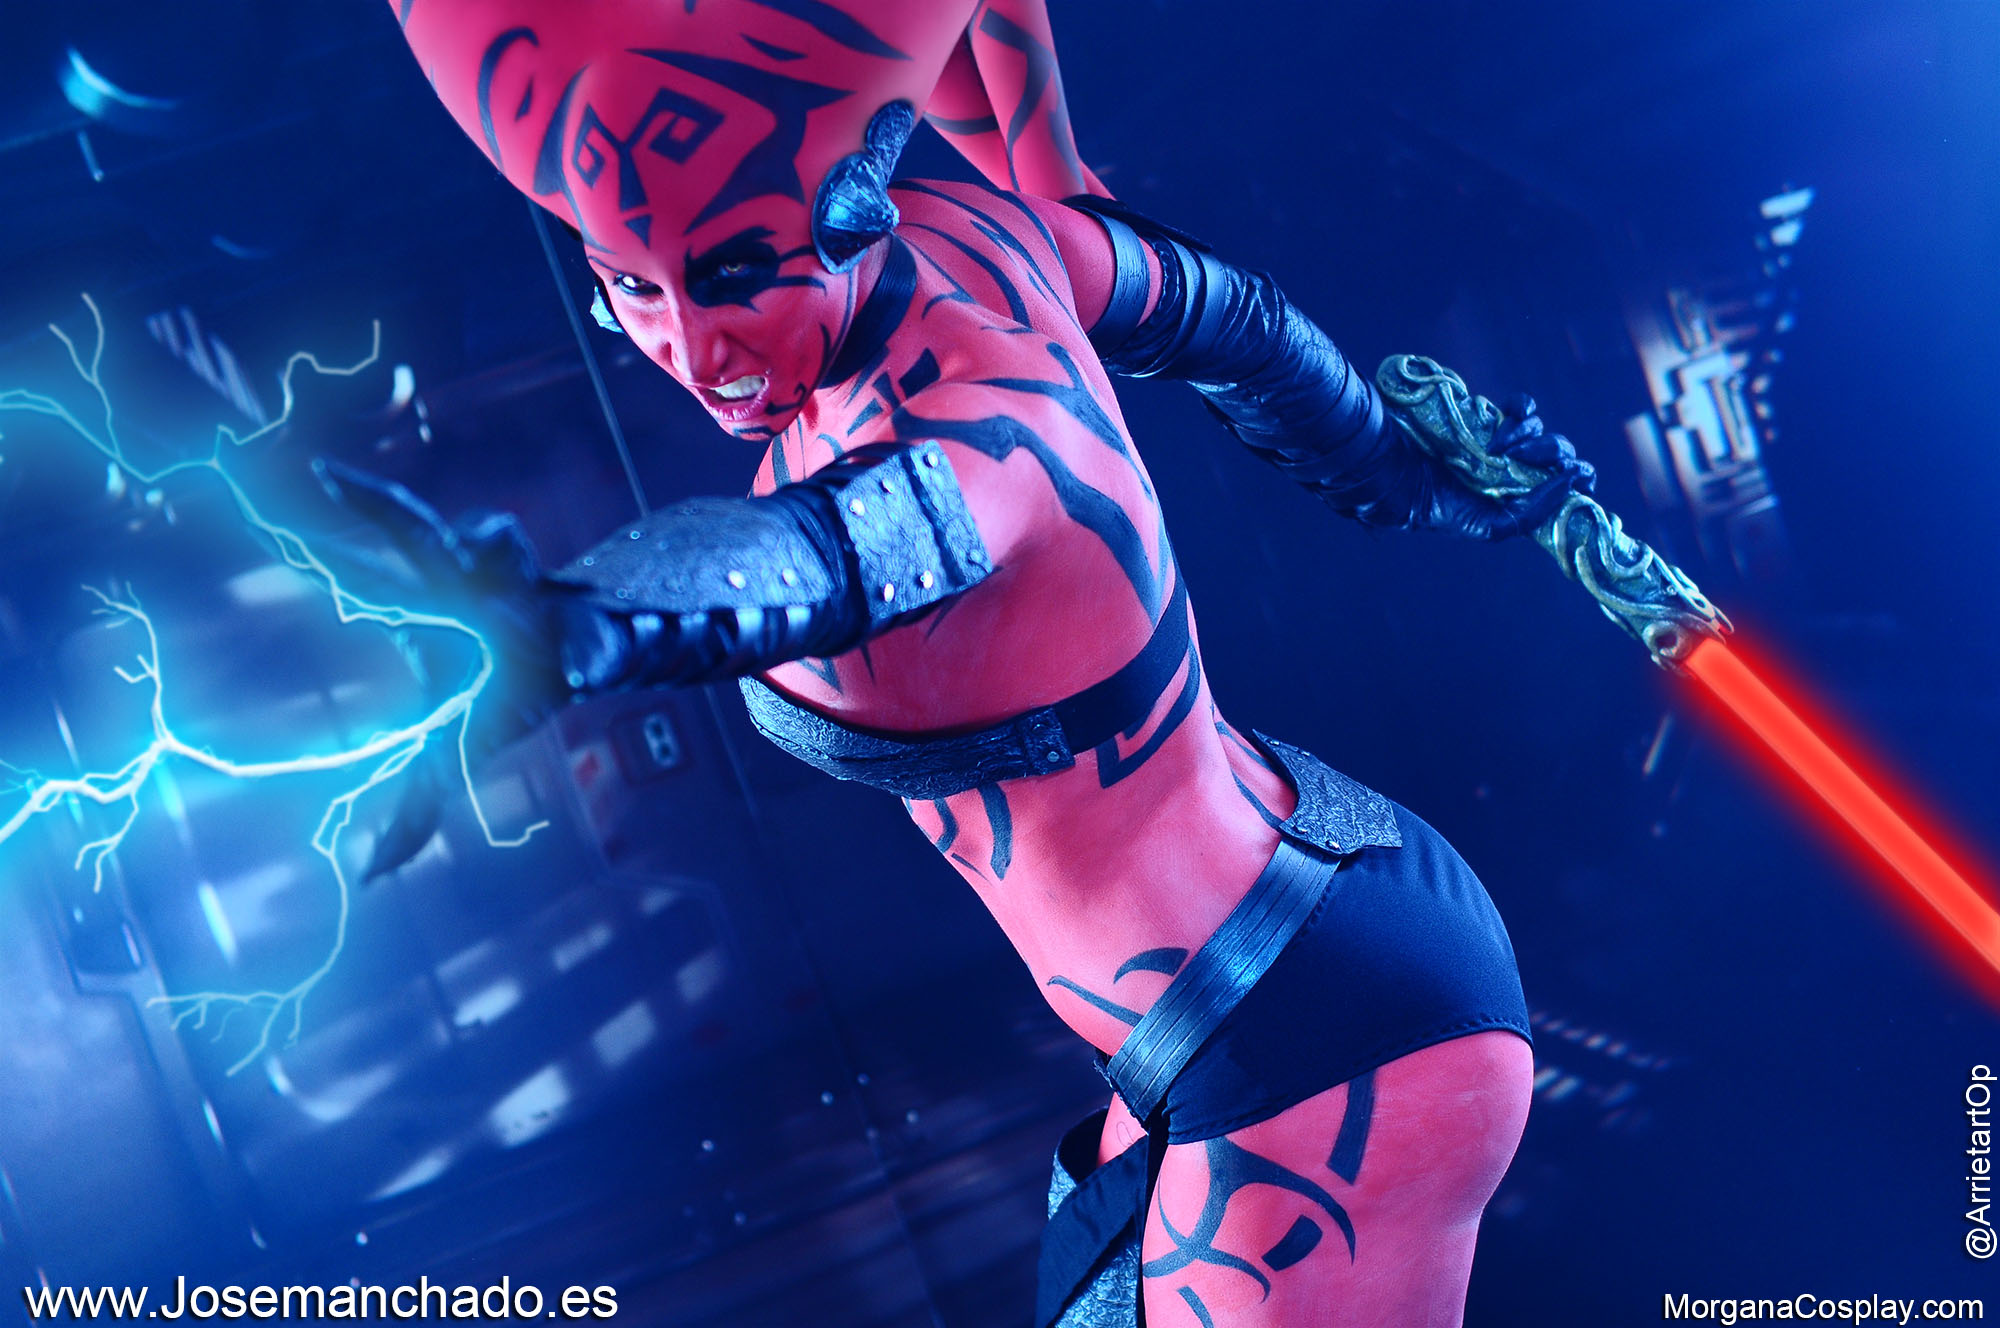 Here you have my Darth Talon Cosplay! 